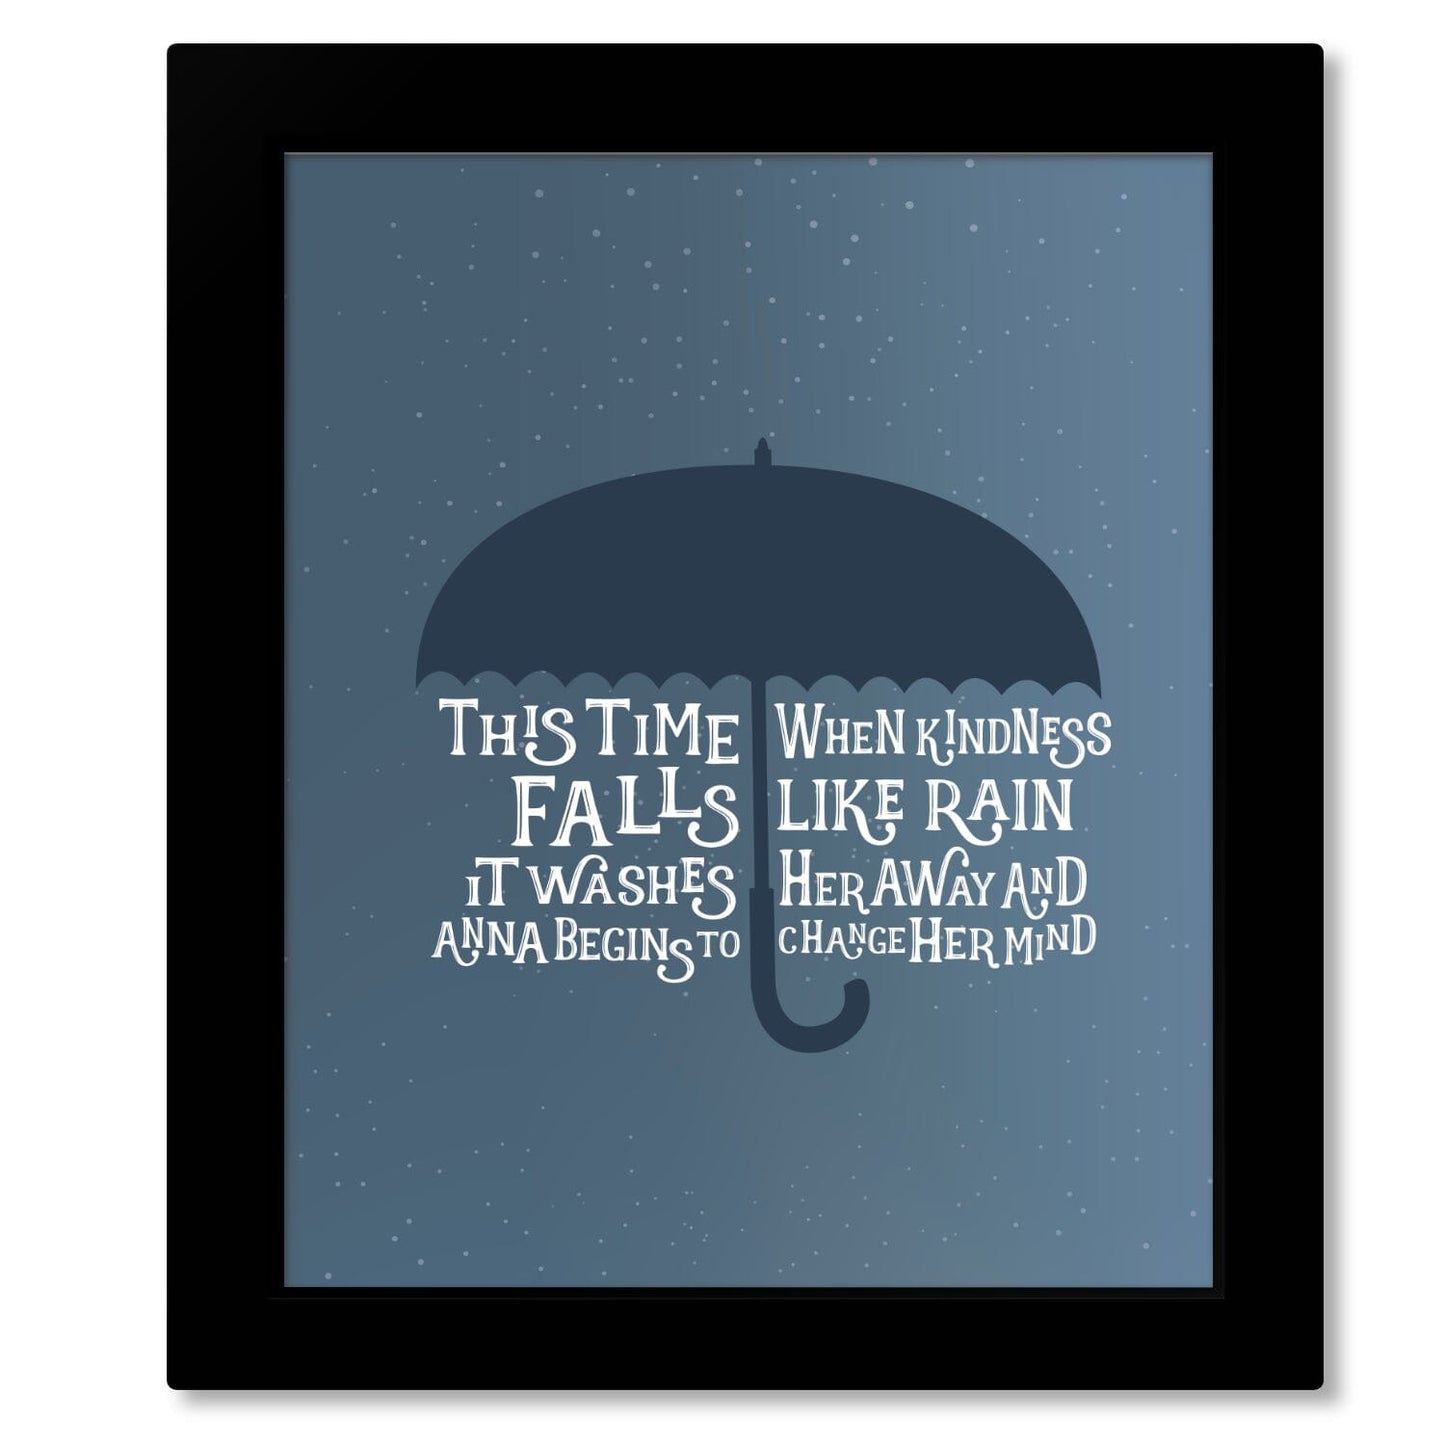 Anna Begins by the Counting Crows - Music Song Lyric Art Song Lyrics Art Song Lyrics Art 